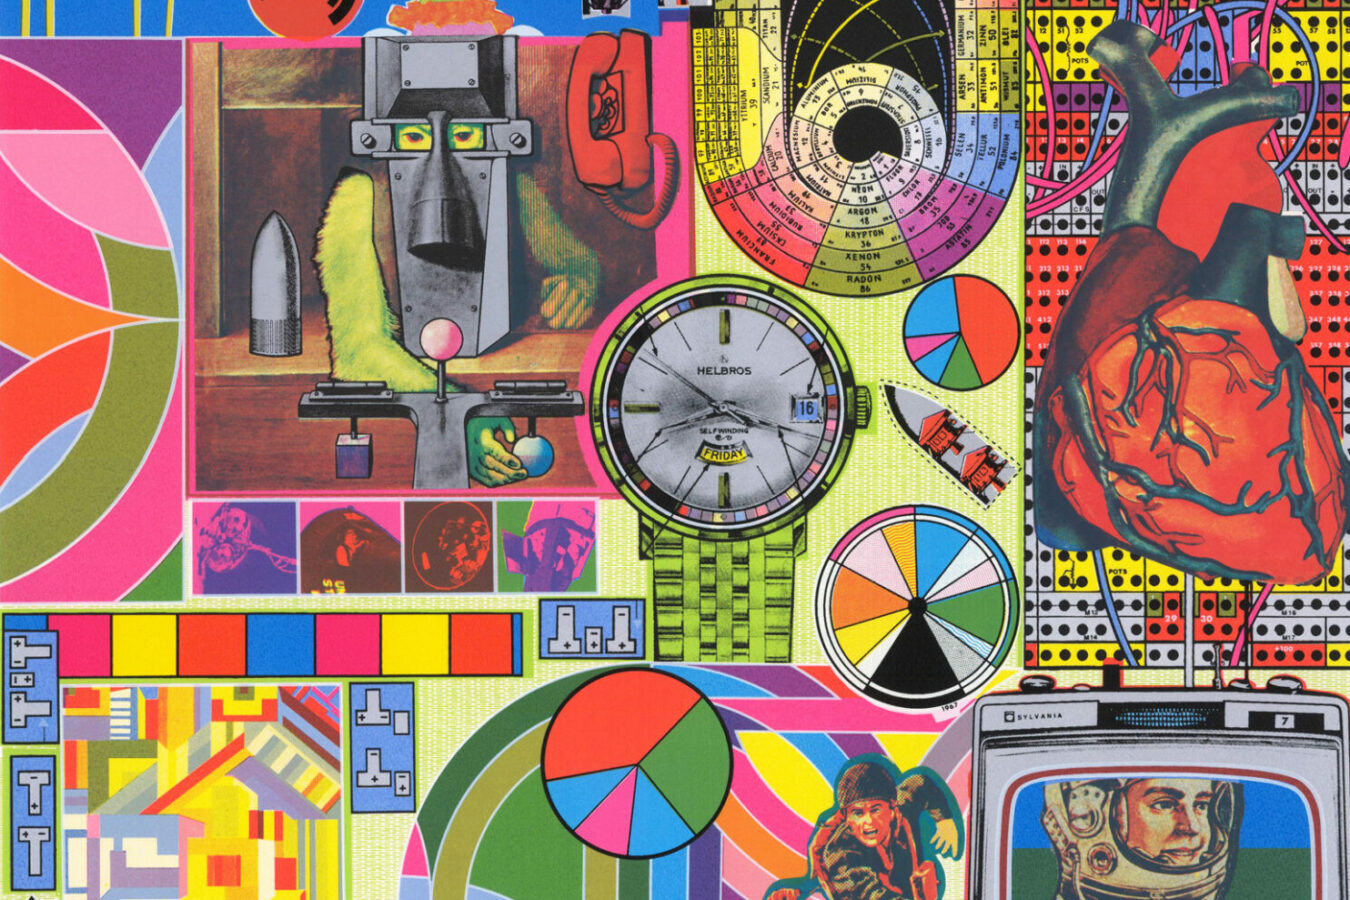 a colourful collage of imagery including circular graphics, an atronaut on an retro television, a anatomical heart, a robot and a watch